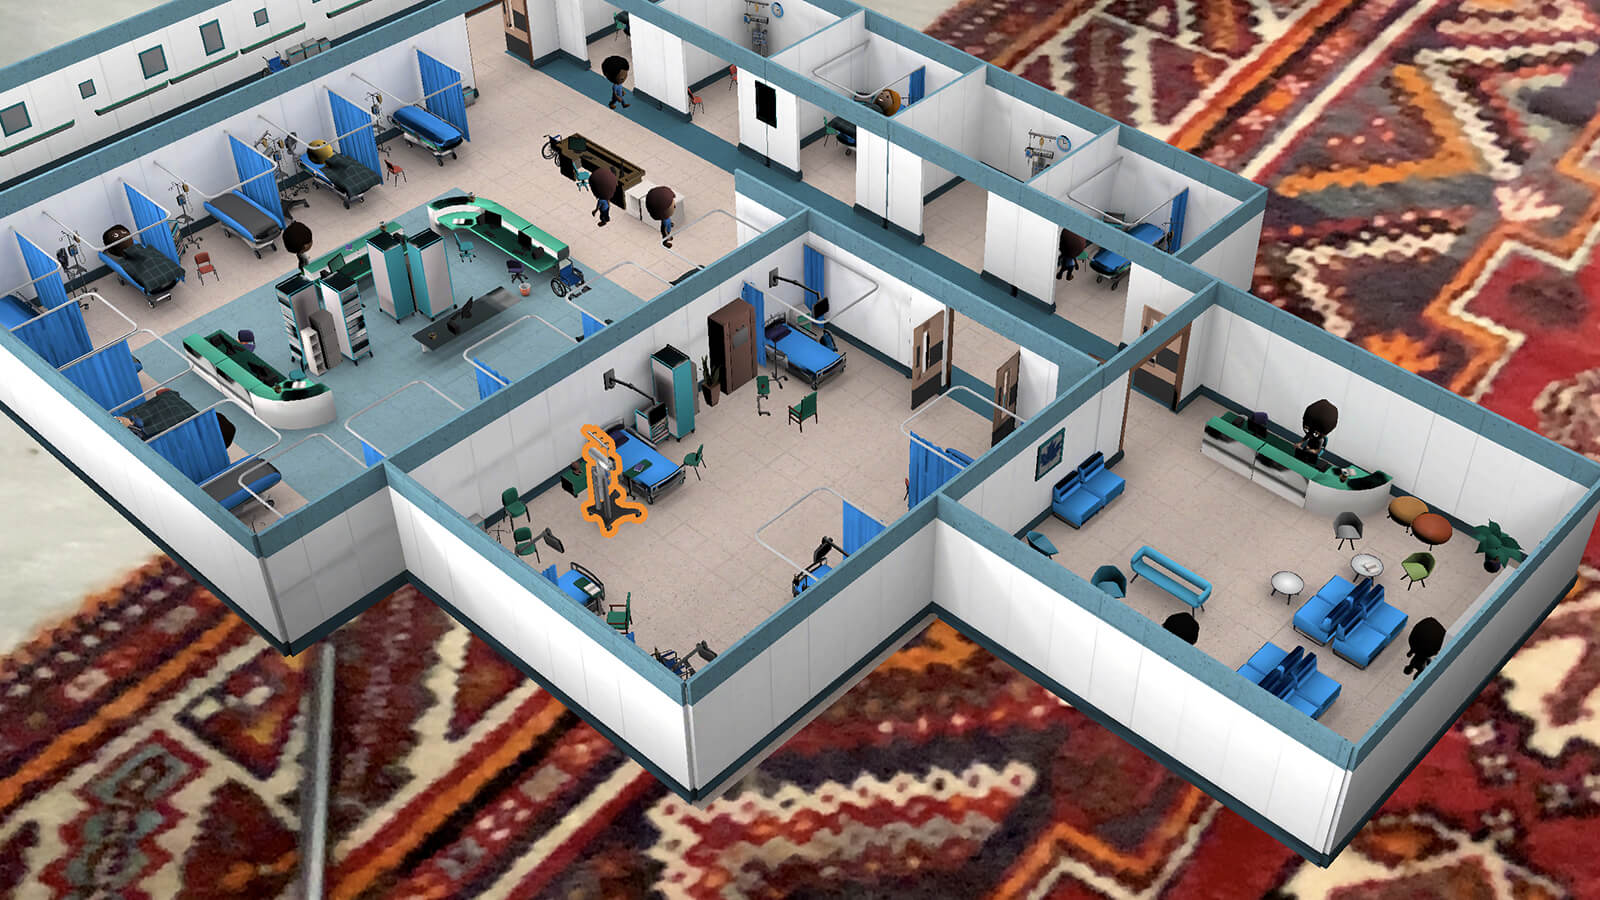 3D model of hospital environment seen in the real world using augmented reality